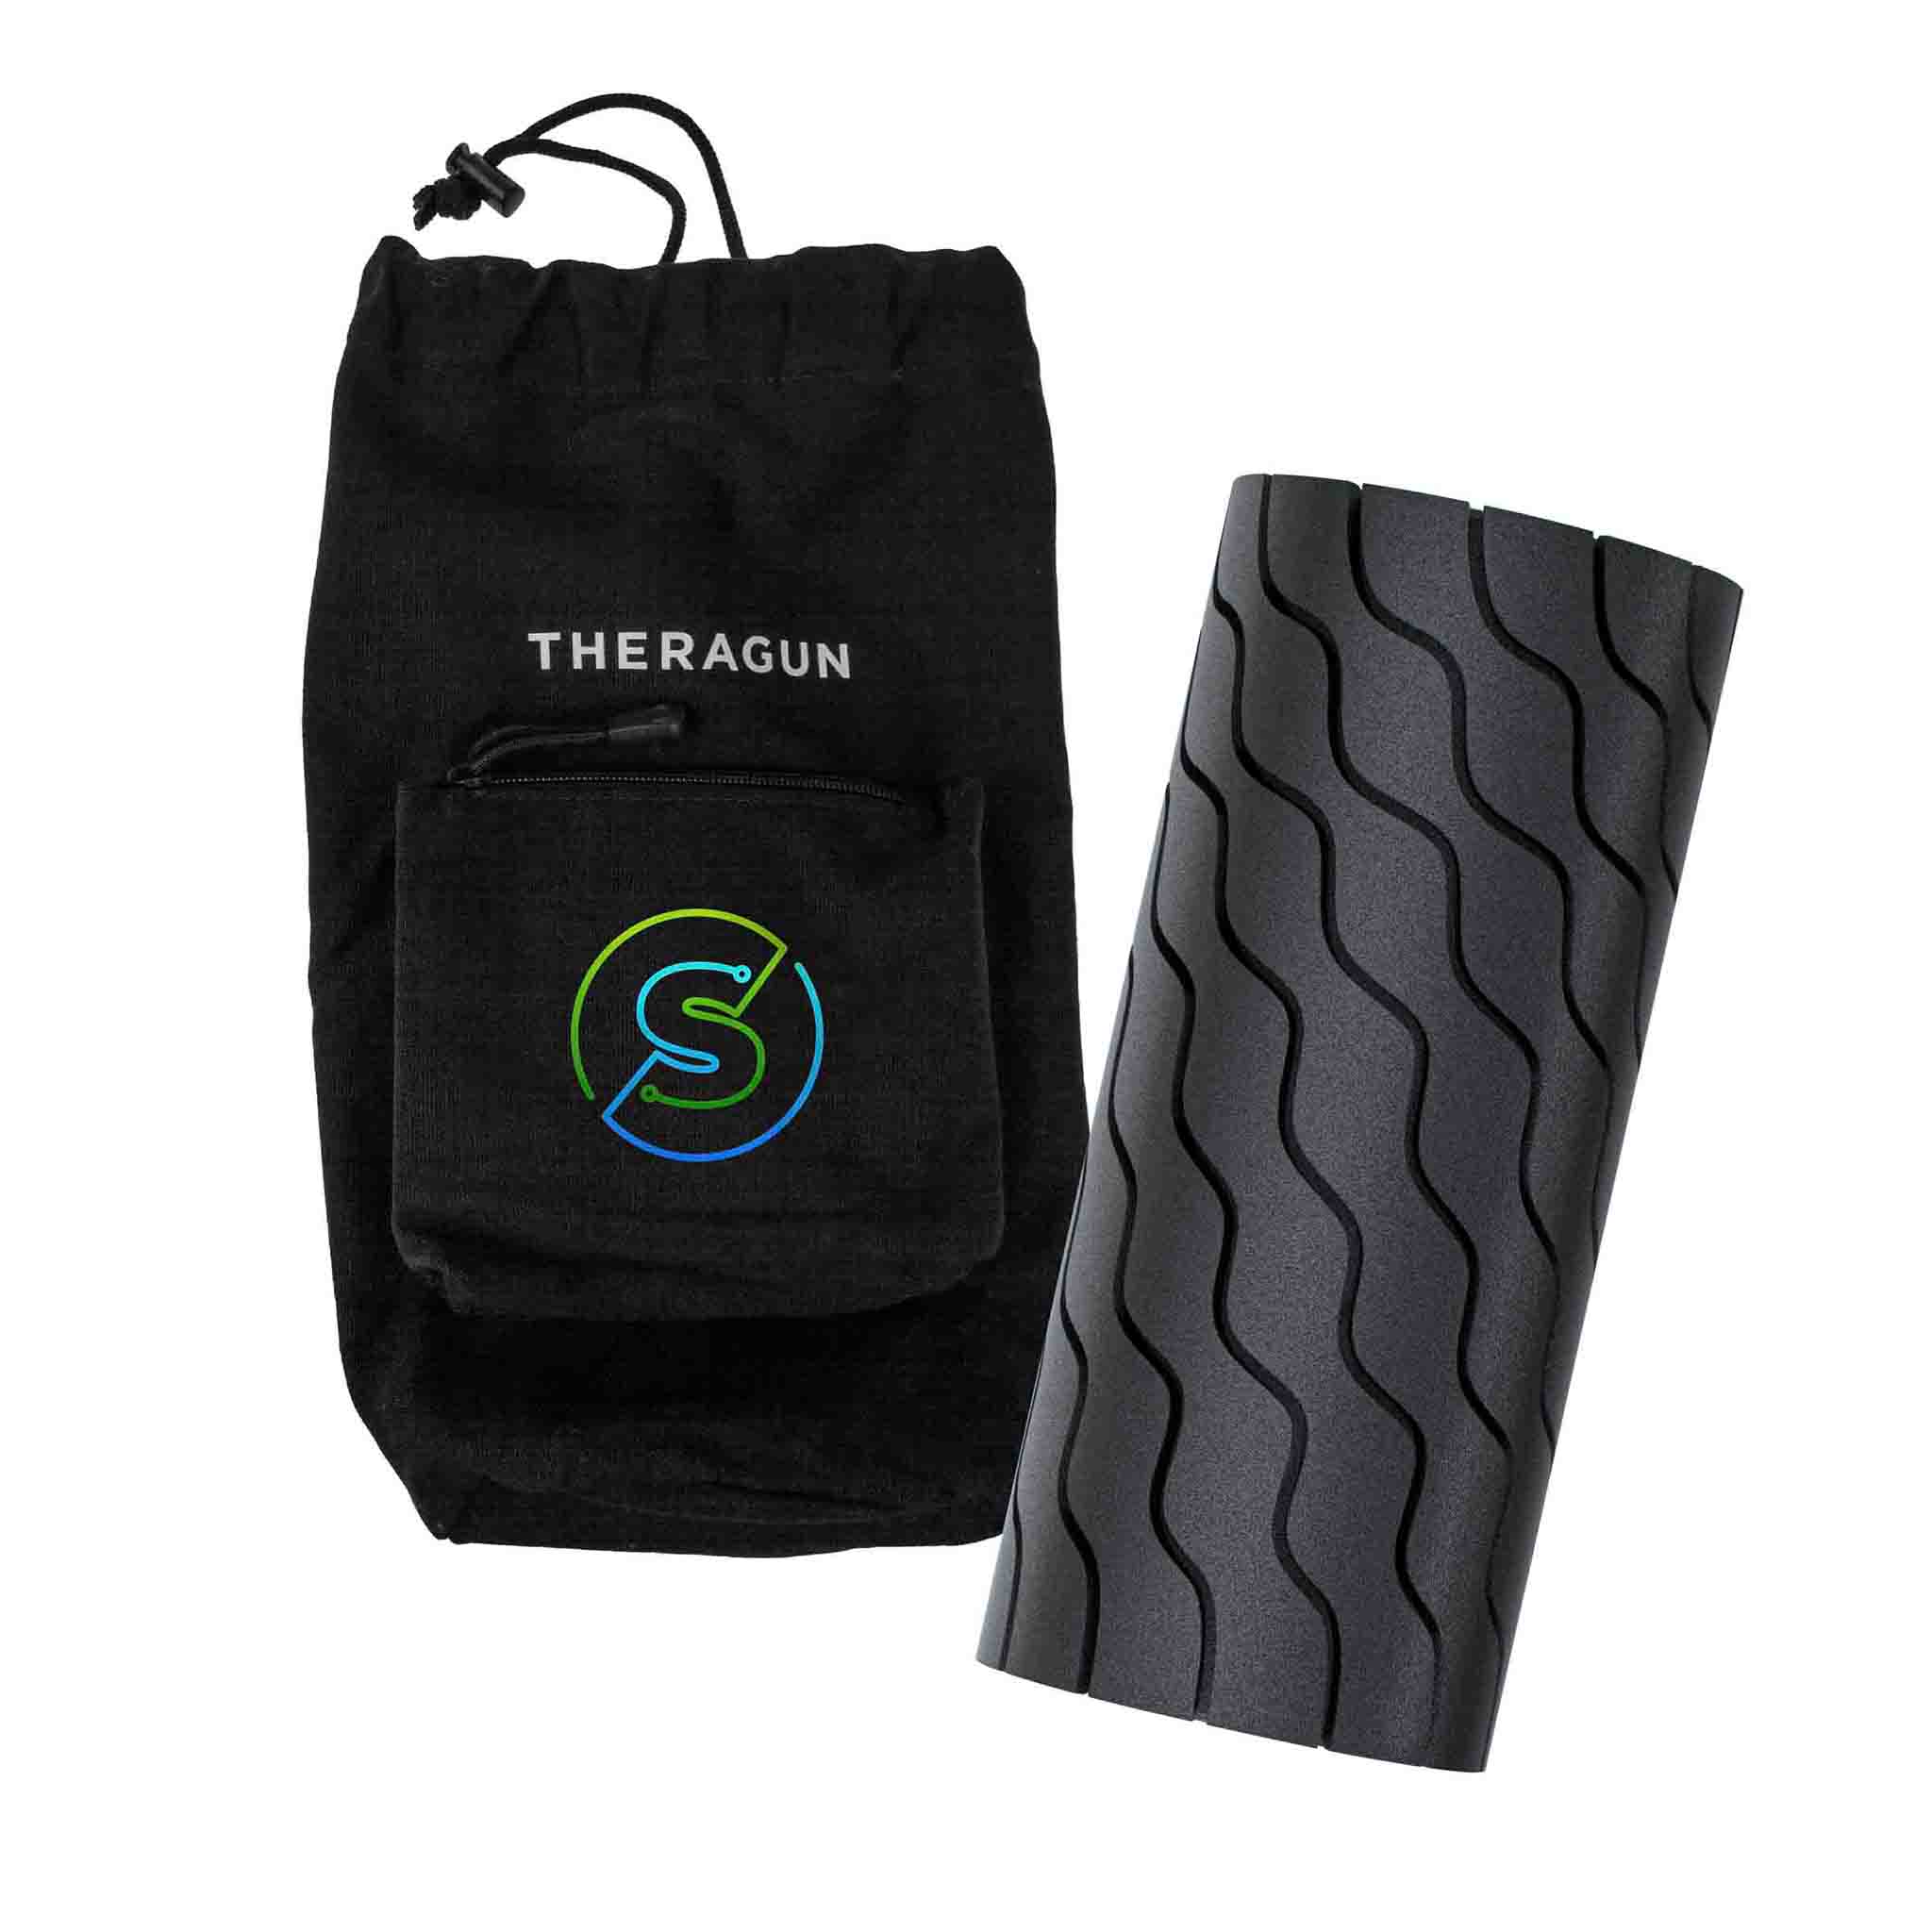 Therabody Wave Roller Black - Personalise with a thermal print in full colour pouch and a sleeve